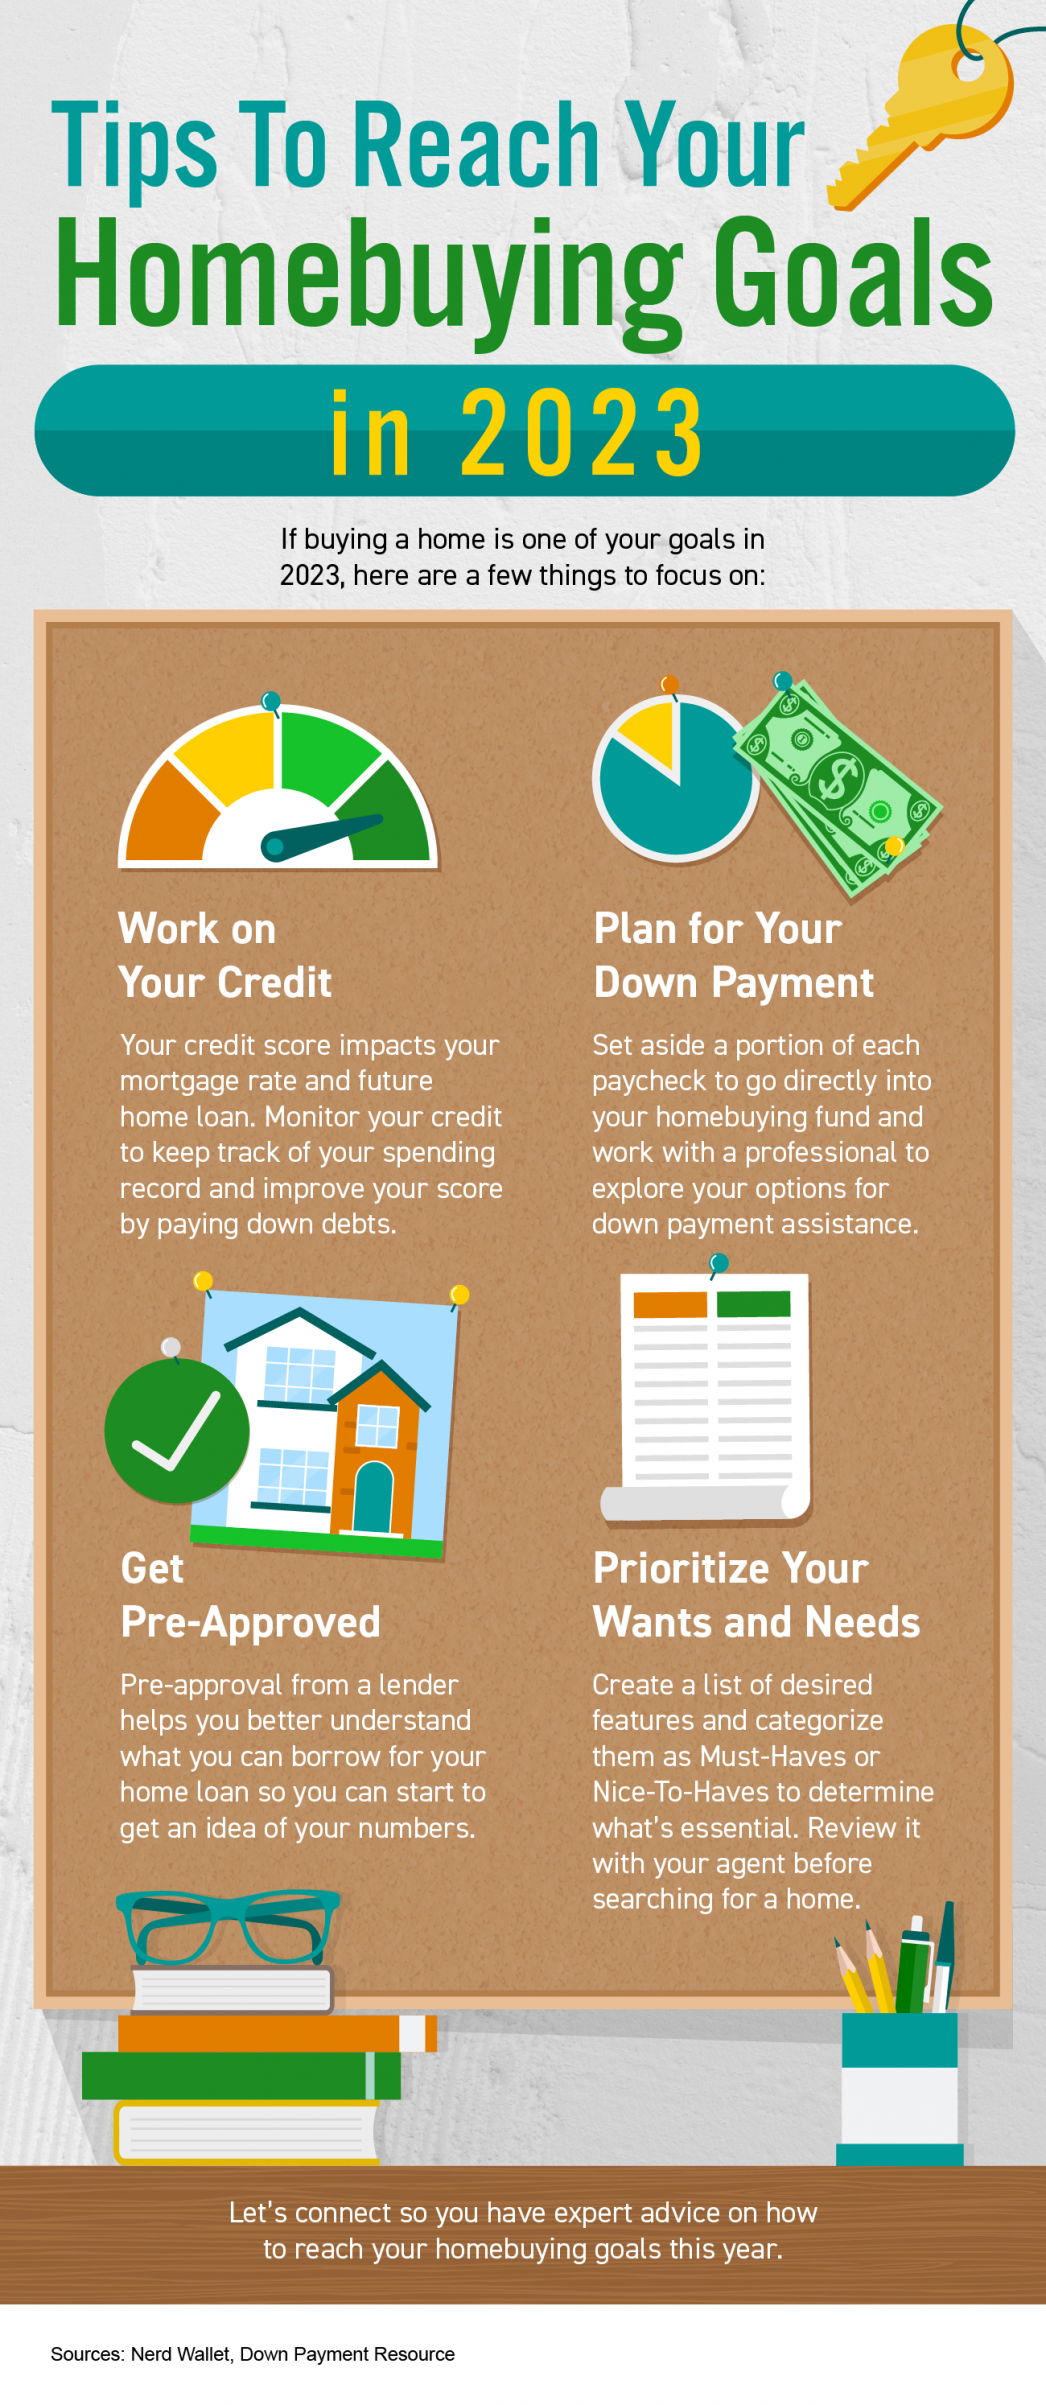 Tips To Reach Your Homebuying Goals in 2023 [INFOGRAPHIC] | MyKCM